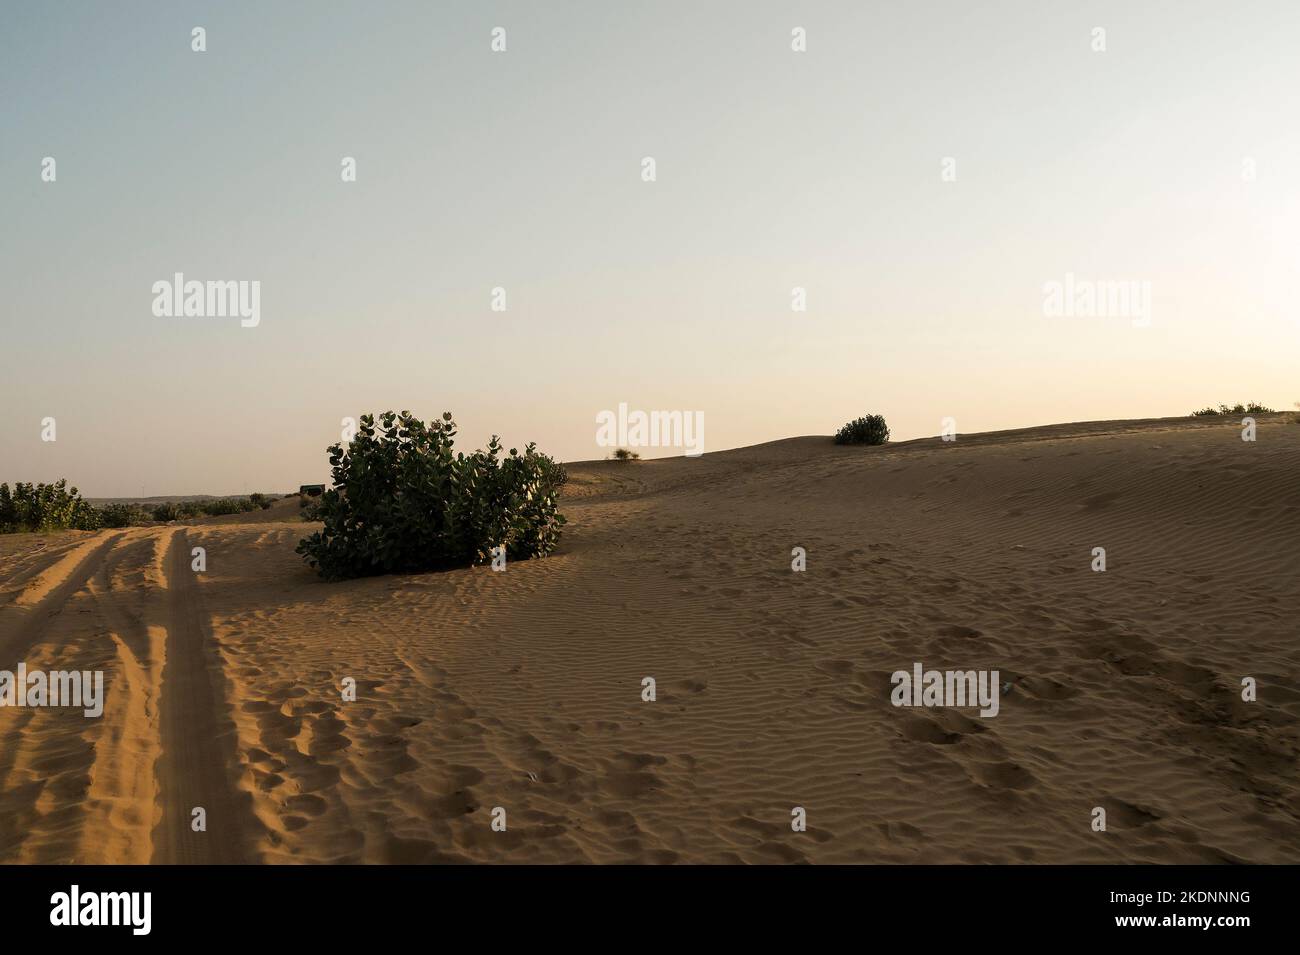 Car tyre marks on sand dunes of Thar desert, Rajasthan, India. Tourists arrive on cars to watch sun rise at desert , a very popular adventure activity. Stock Photo